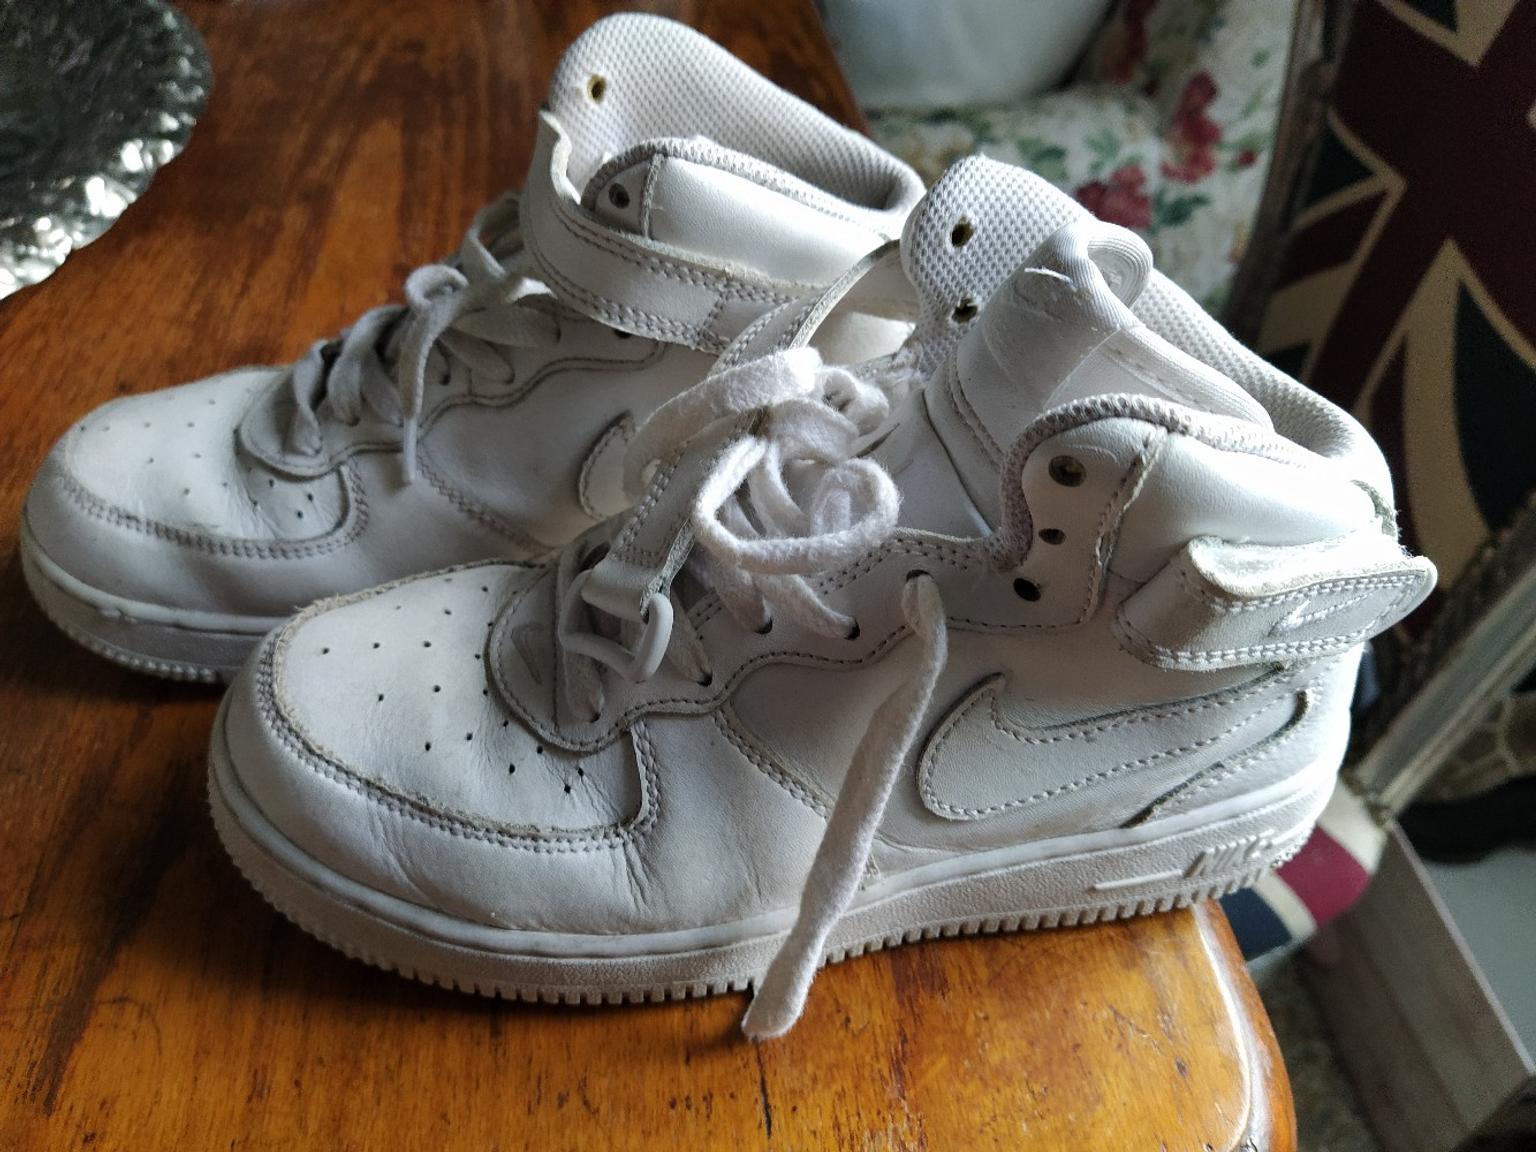 Nike Air Force n. 34 in 00172 Roma for €20.00 for sale | Shpock